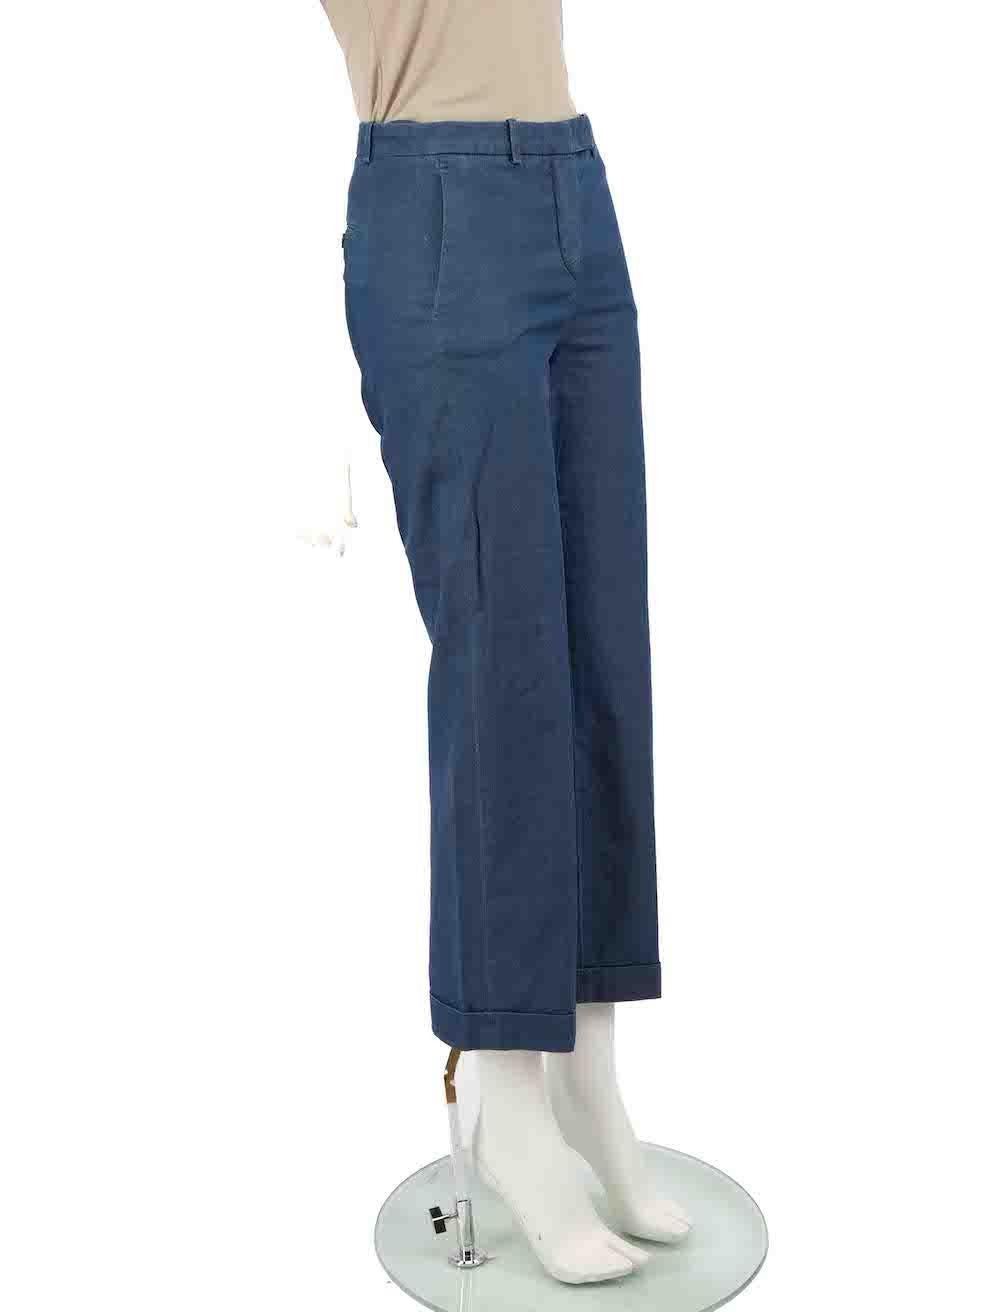 CONDITION is Very good. Hardly any visible wear to trousers is evident on this used Loro Piana designer resale item.
 
 
 
 Details
 
 
 Blue
 
 Cotton
 
 Trousers
 
 Straight leg
 
 Mid rise
 
 Cropped fit
 
 2x Side pockets
 
 2x Back pockets
 
